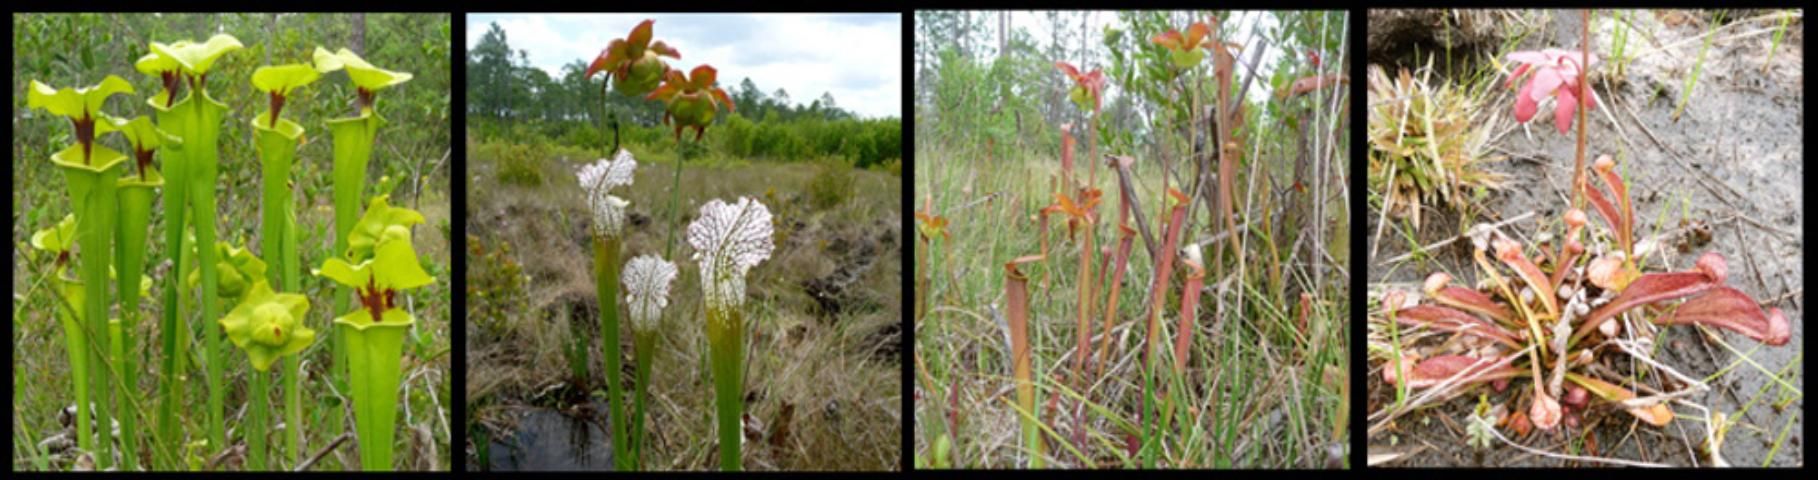 Figure 3. Pitcherplant species from left to right, yellow trumpet, white-top pitcherplant, sweet pitcherplant, and parrot pitcherplant.